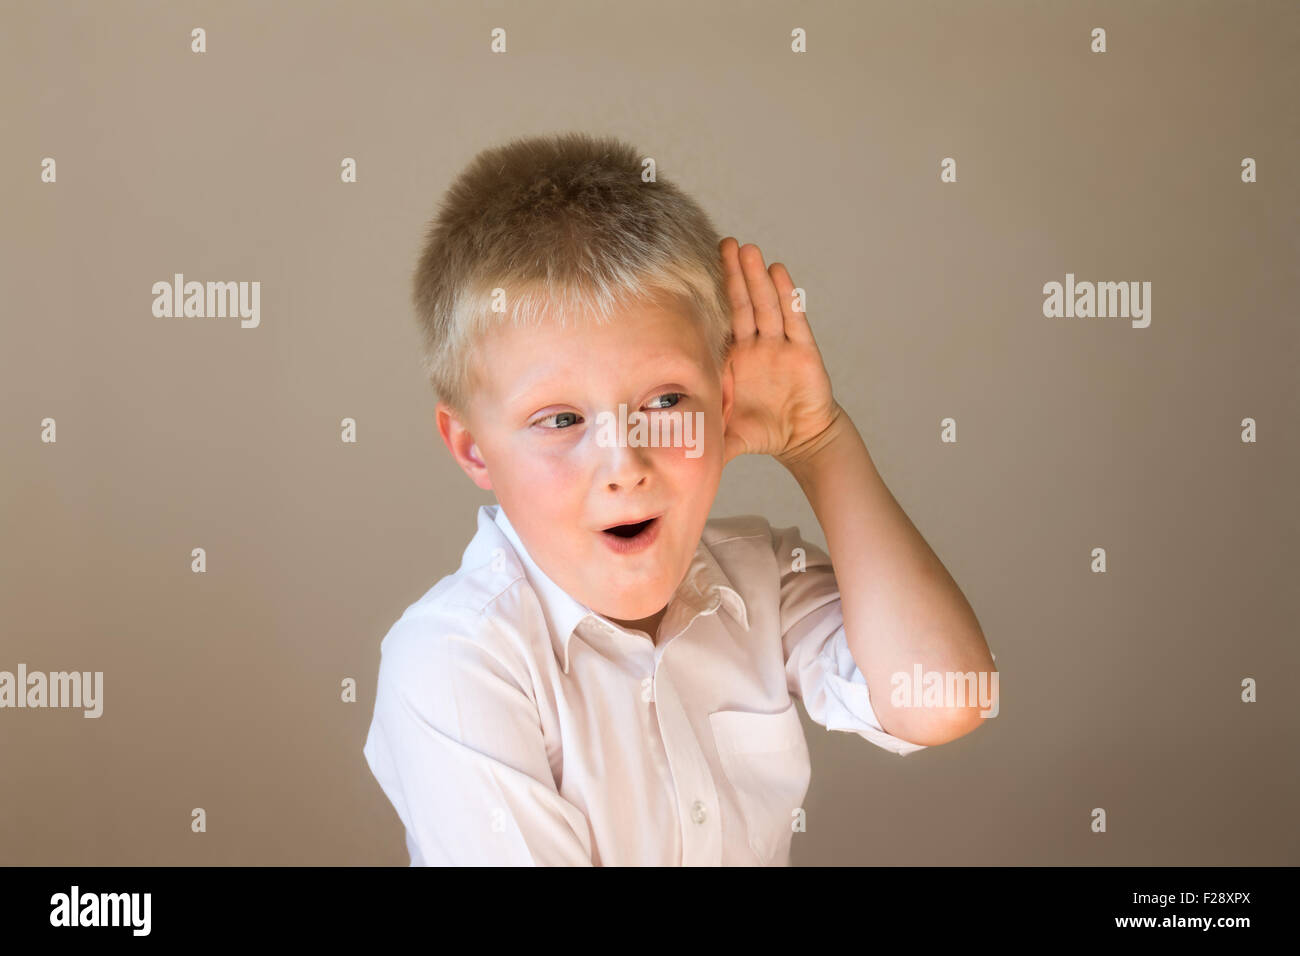 Funny child listening overhearing something with hand to ear concept Stock Photo